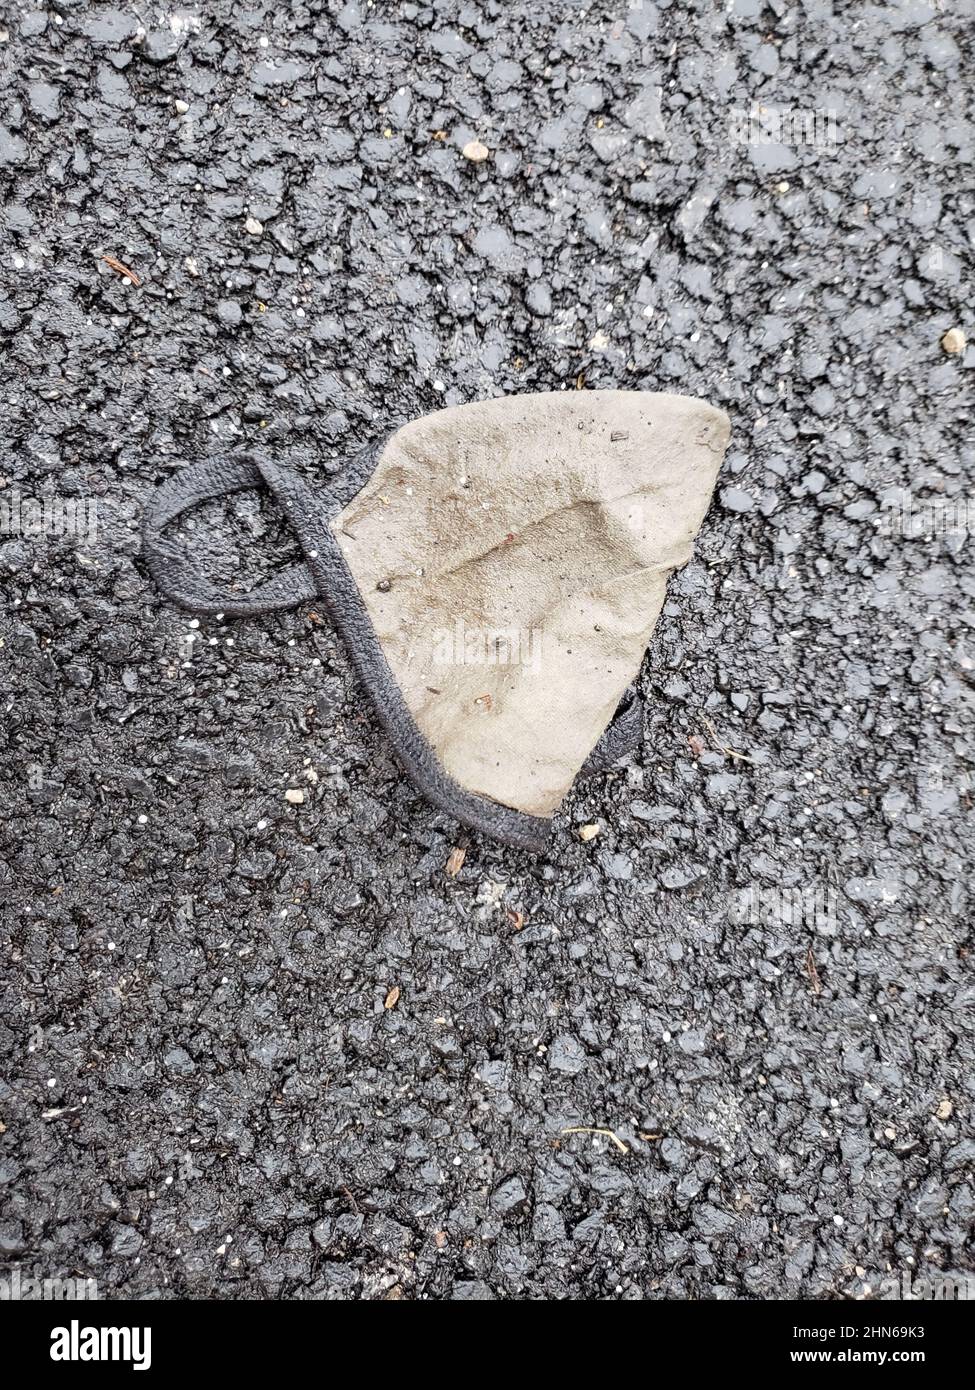 Dirty, discarded face mask on the ground Stock Photo